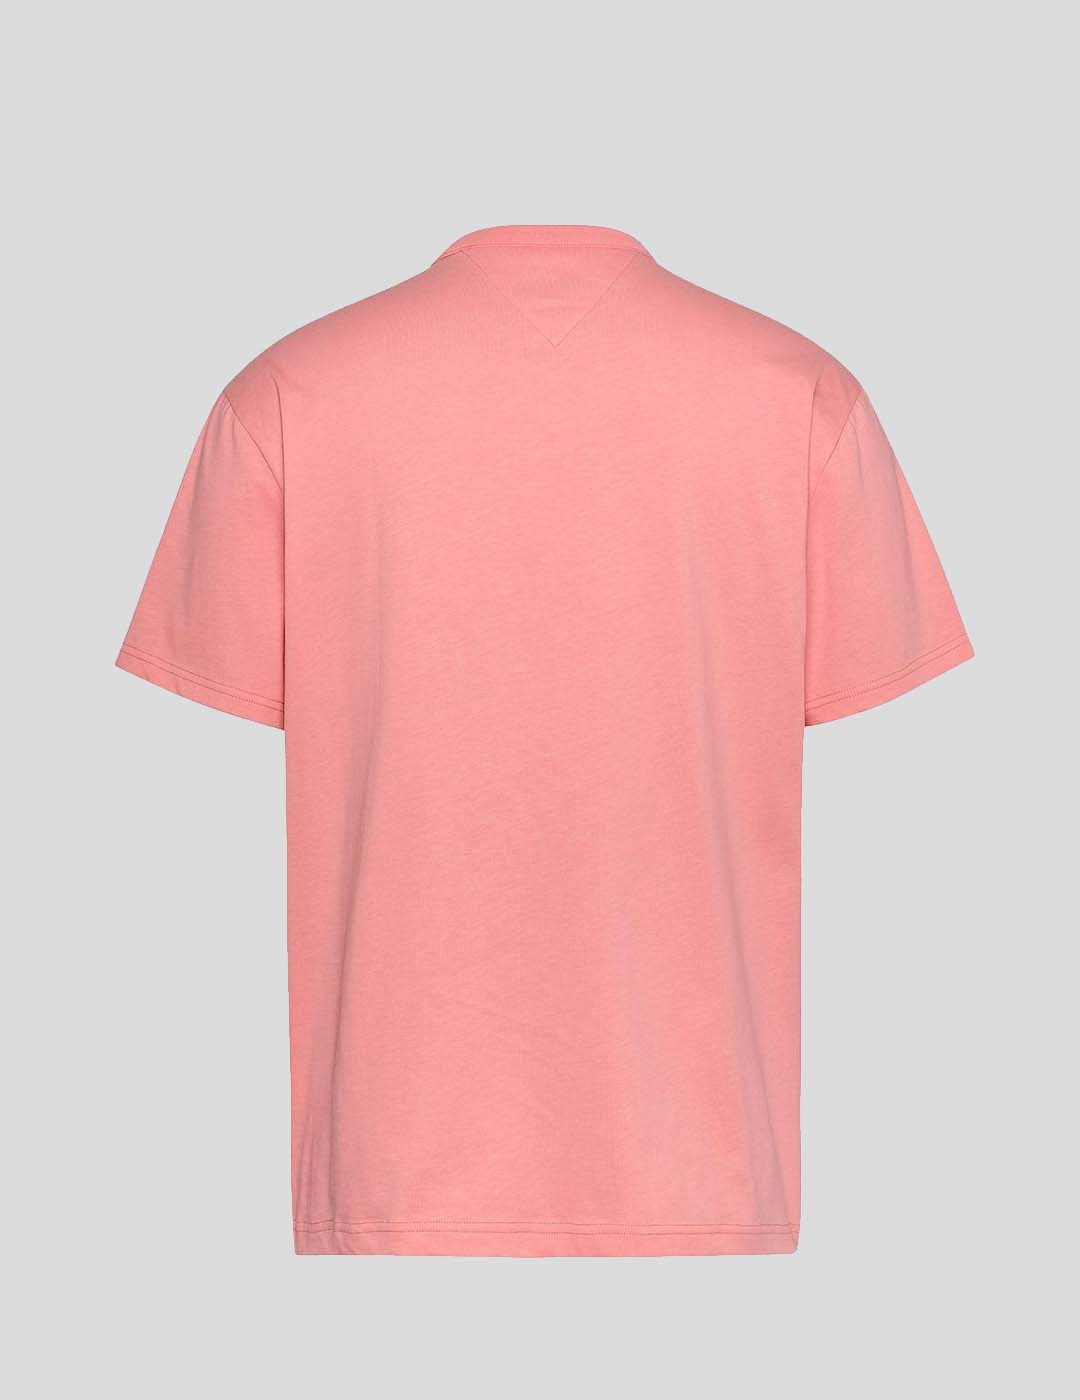 CAMISETA TOMMY JEANS REGULAR CORP SIGNATURE TEE TIC PINK